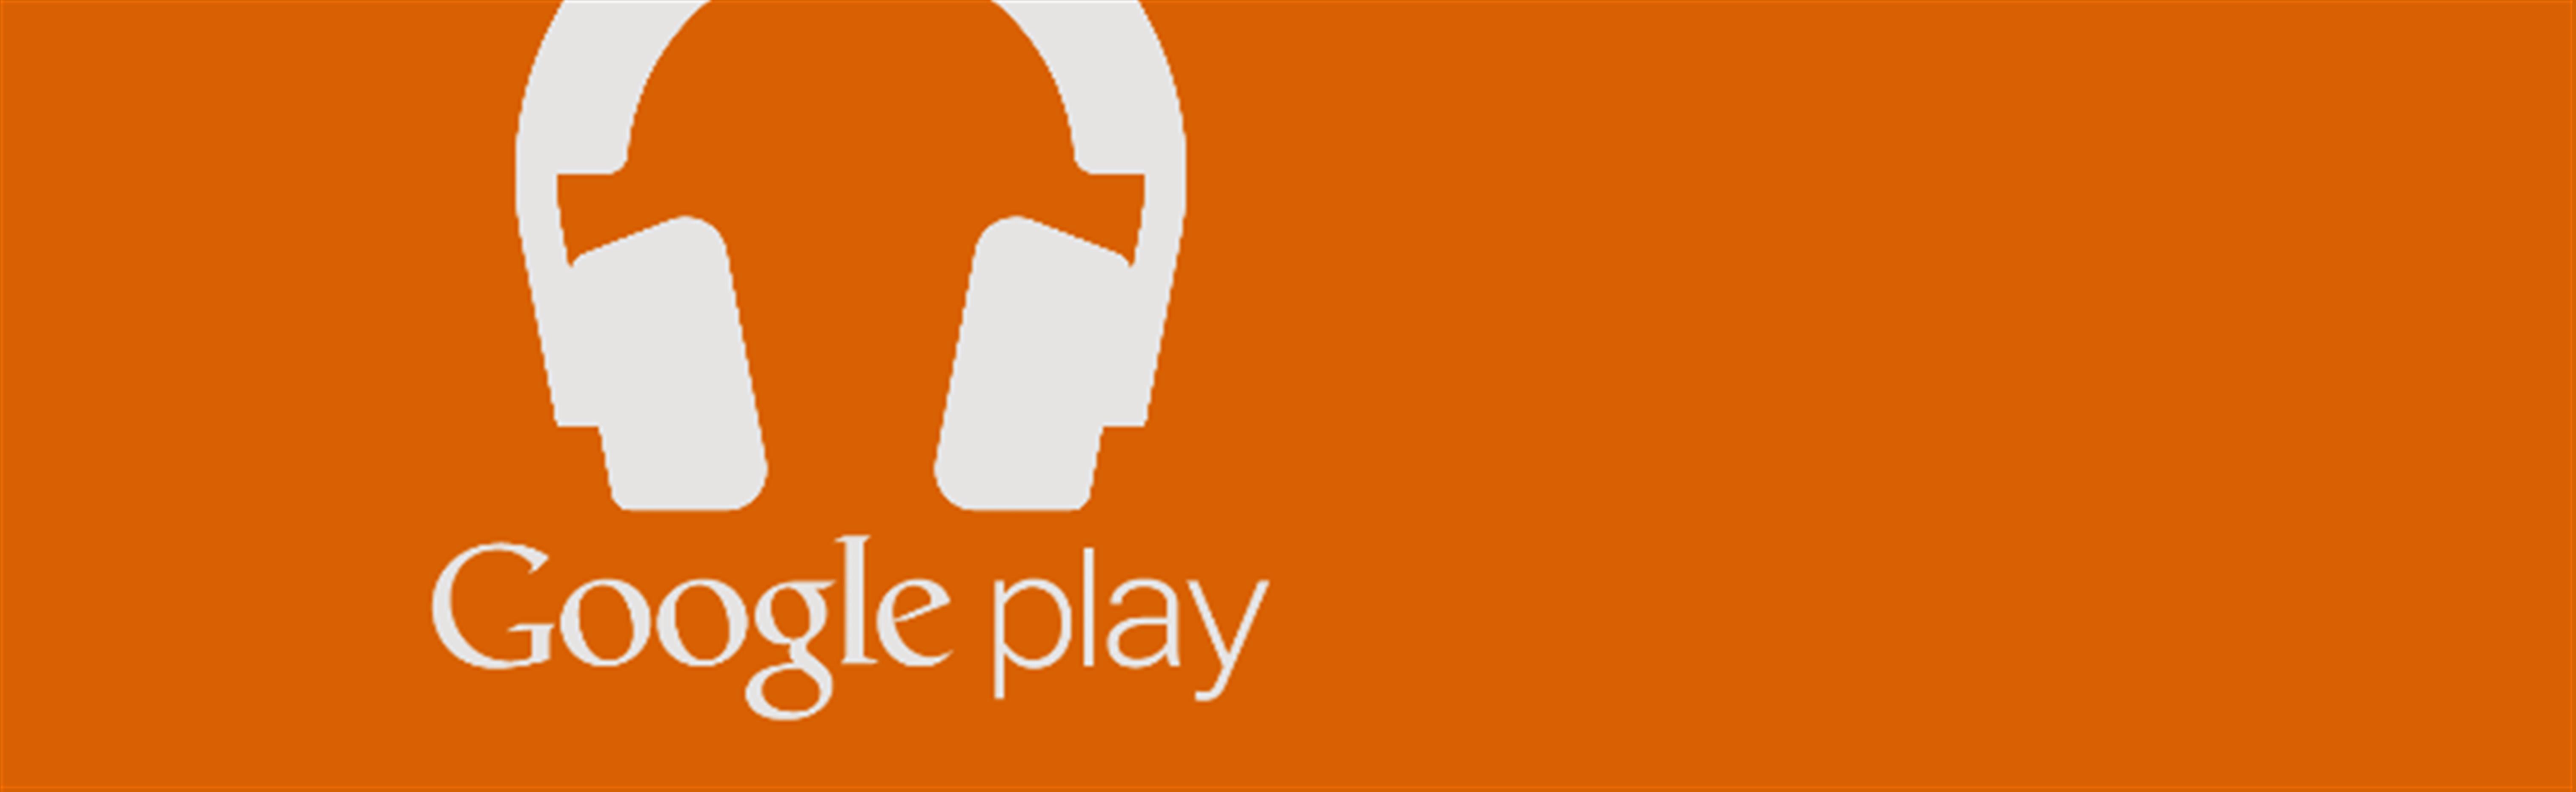 New Partnerships made Google Play Music Default and increased its Storage Capacity on Samsung Devices